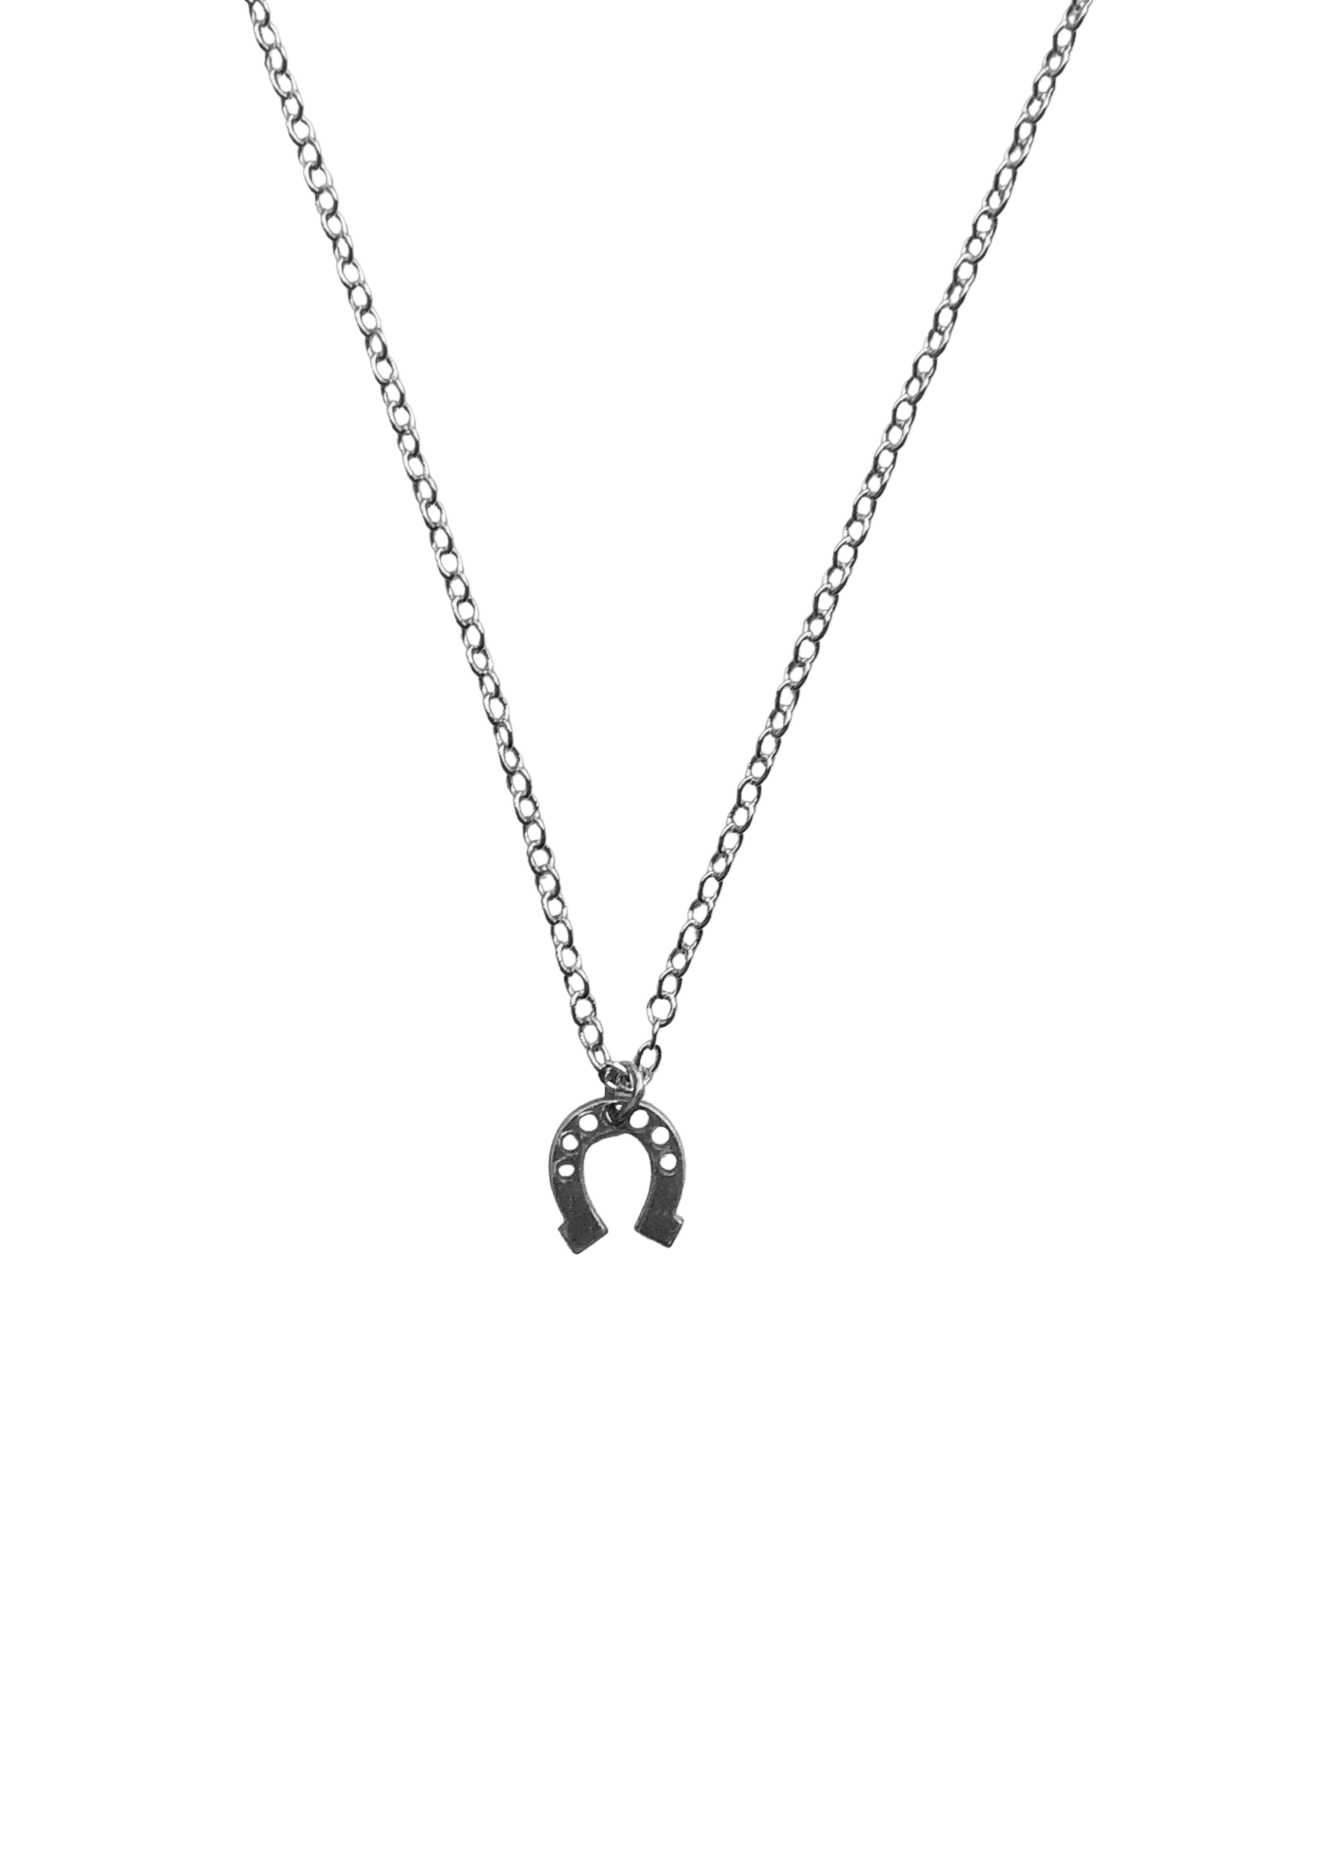 Horseshoe Charm Necklace - .925 Sterling Silver